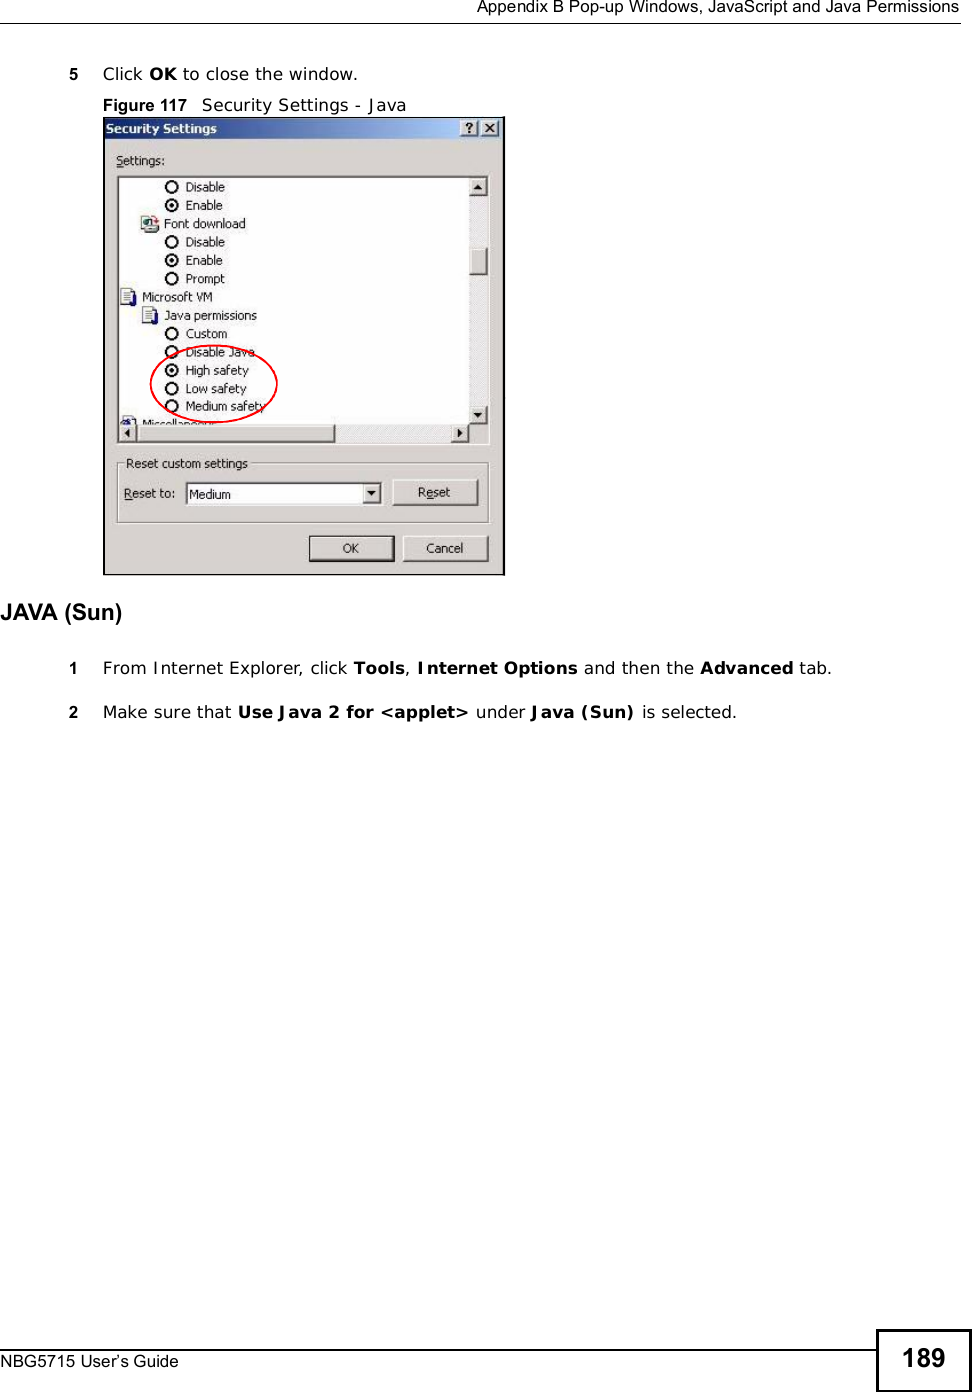  Appendix BPop-up Windows, JavaScript and Java PermissionsNBG5715 User’s Guide 1895Click OK to close the window.Figure 117   Security Settings - Java JAVA (Sun)1From Internet Explorer, click Tools,Internet Options and then the Advanced tab. 2Make sure that Use Java 2 for &lt;applet&gt; under Java (Sun) is selected.